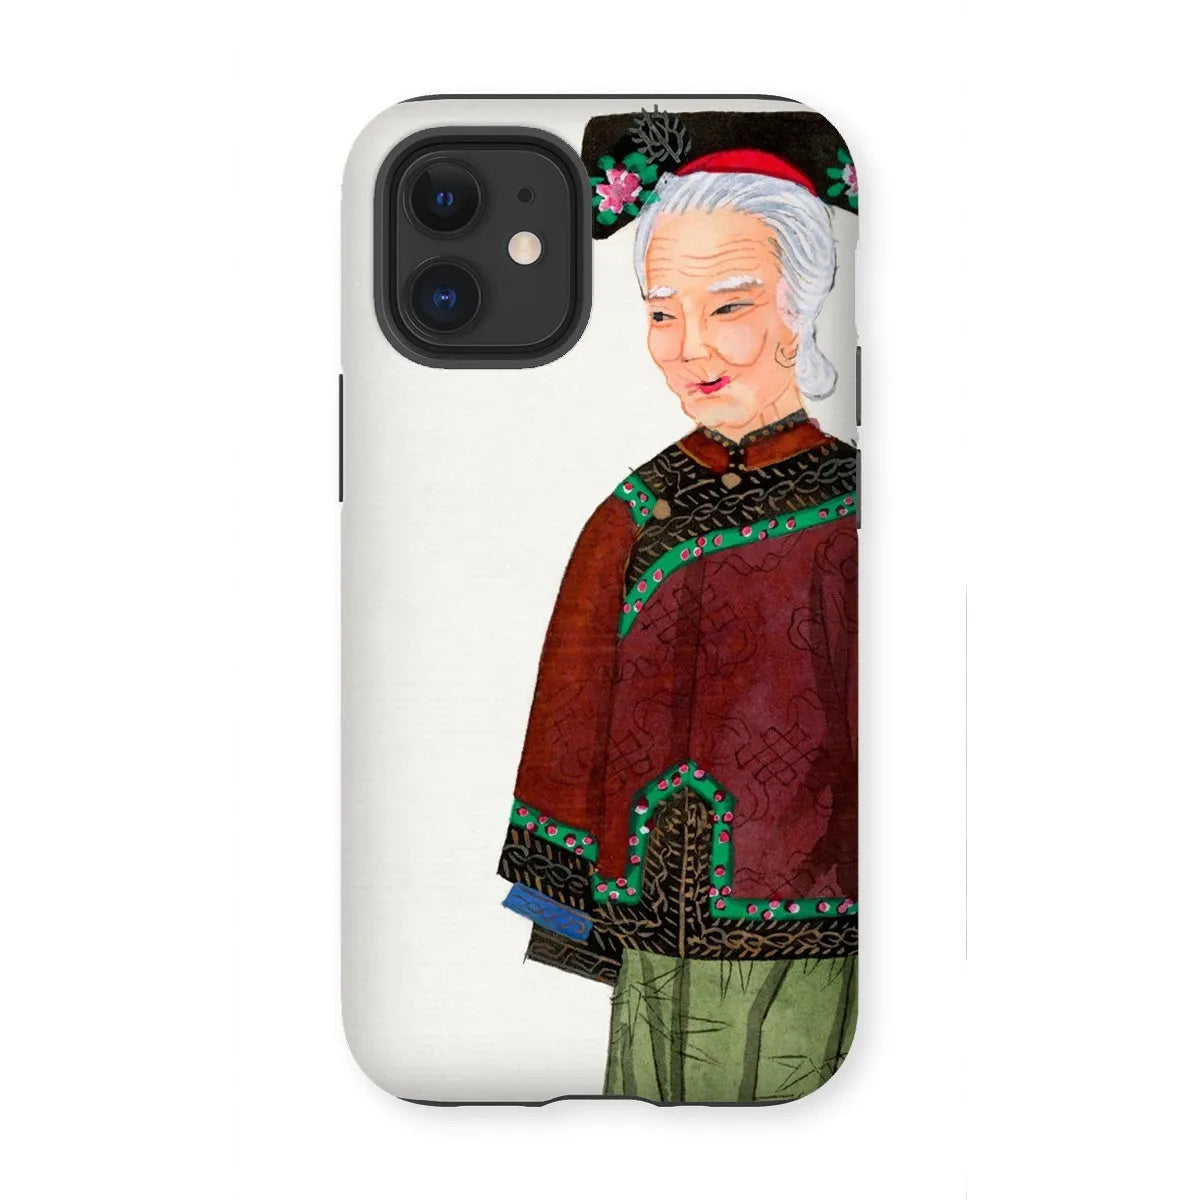 Grand Dame Too - Aesthetic Chinese Art Phone Case - Iphone 12 Mini / Matte - Mobile Phone Cases - Aesthetic Art